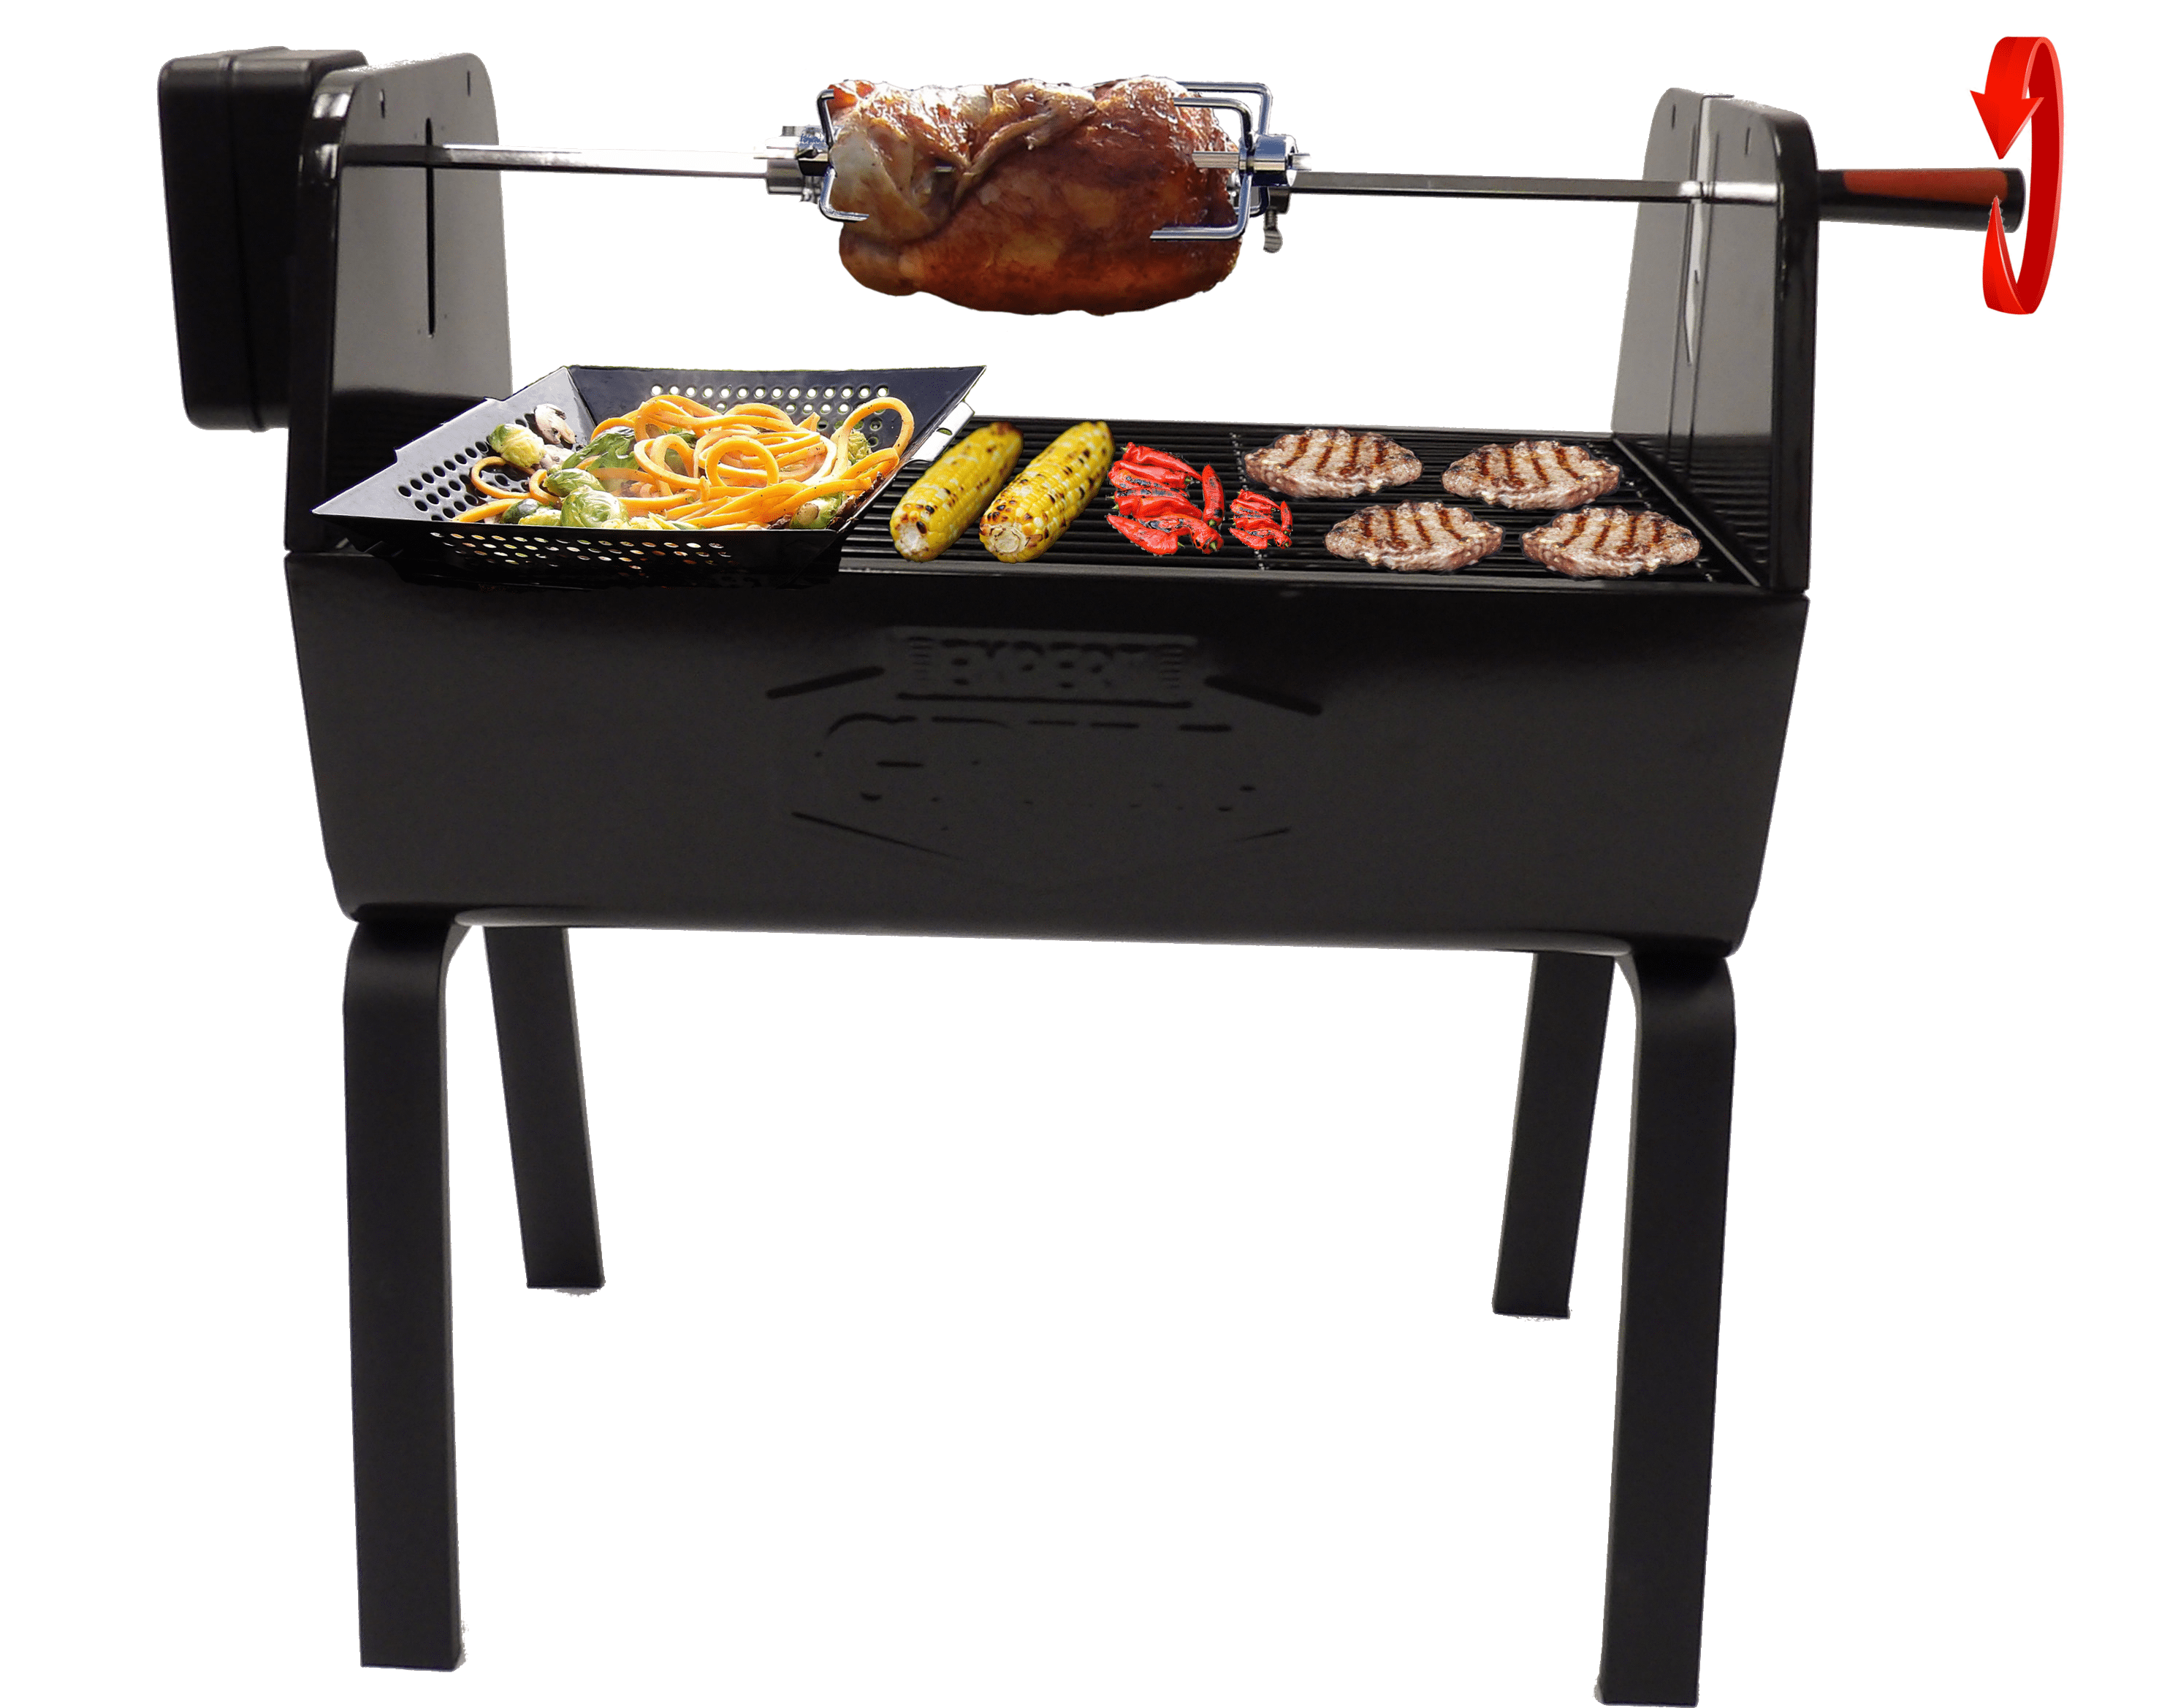 51 Grilling and BBQ Gift Ideas They Actually Want